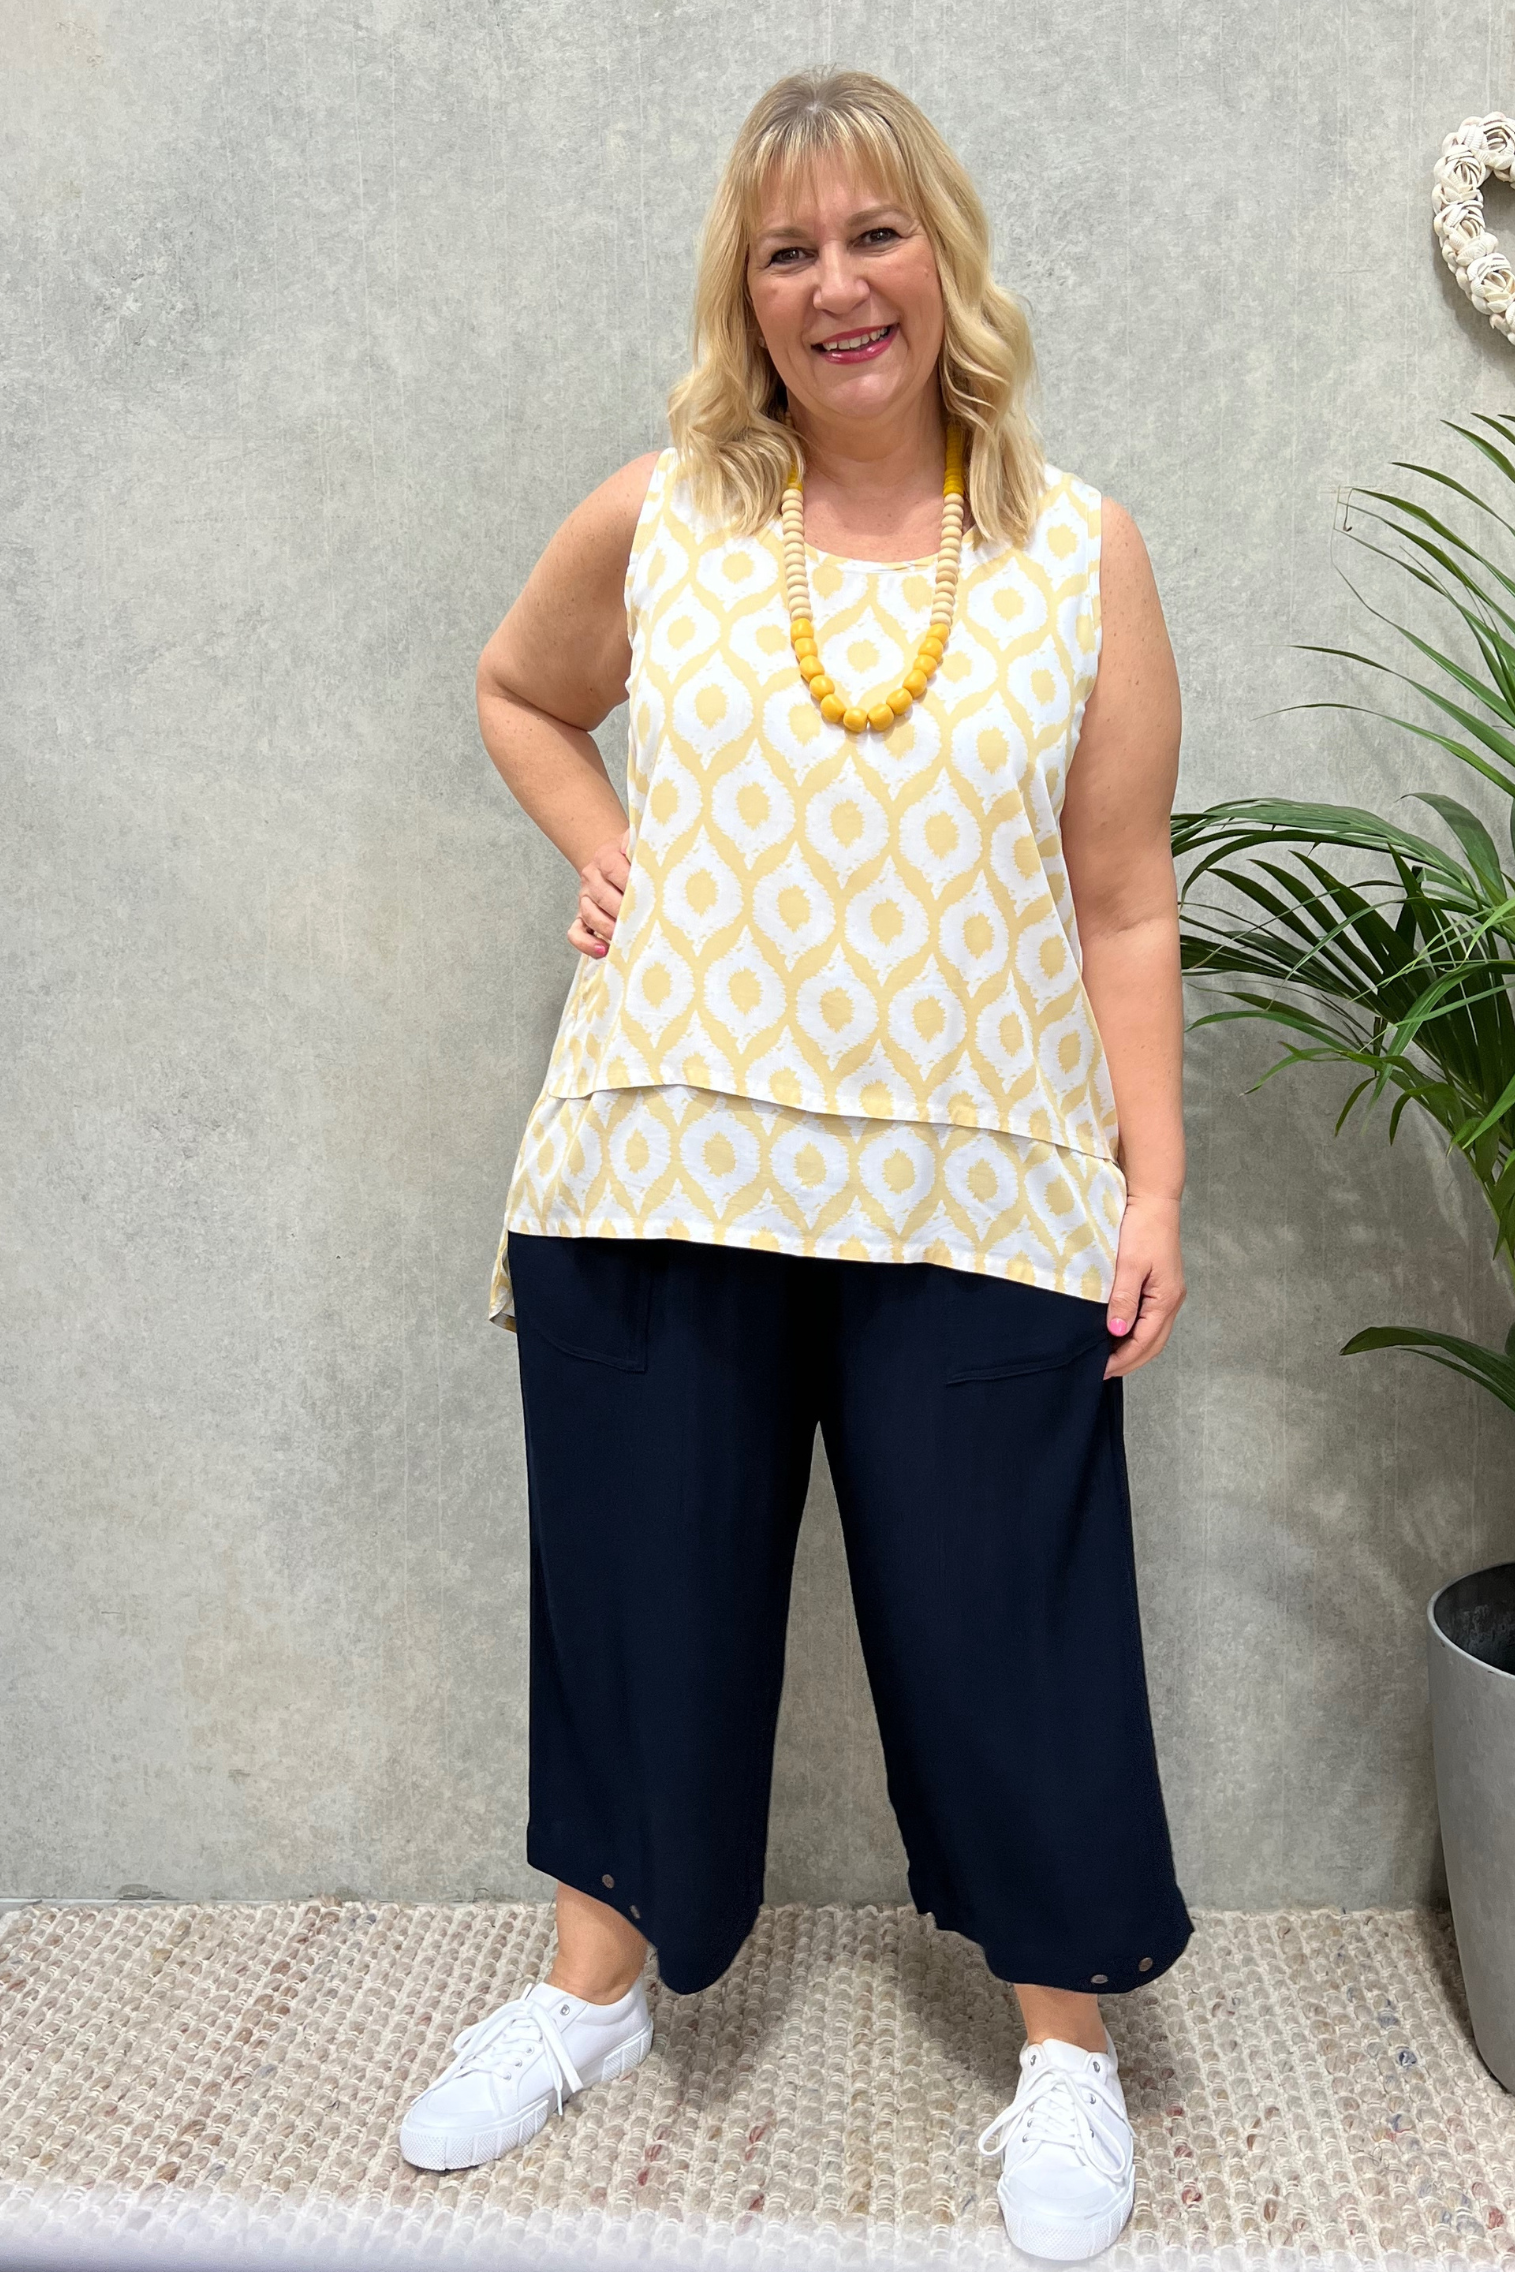  lemon  layered no sleeve Tunic worn by Kita Ku blonde model  over navy wide pant and white sneakers.